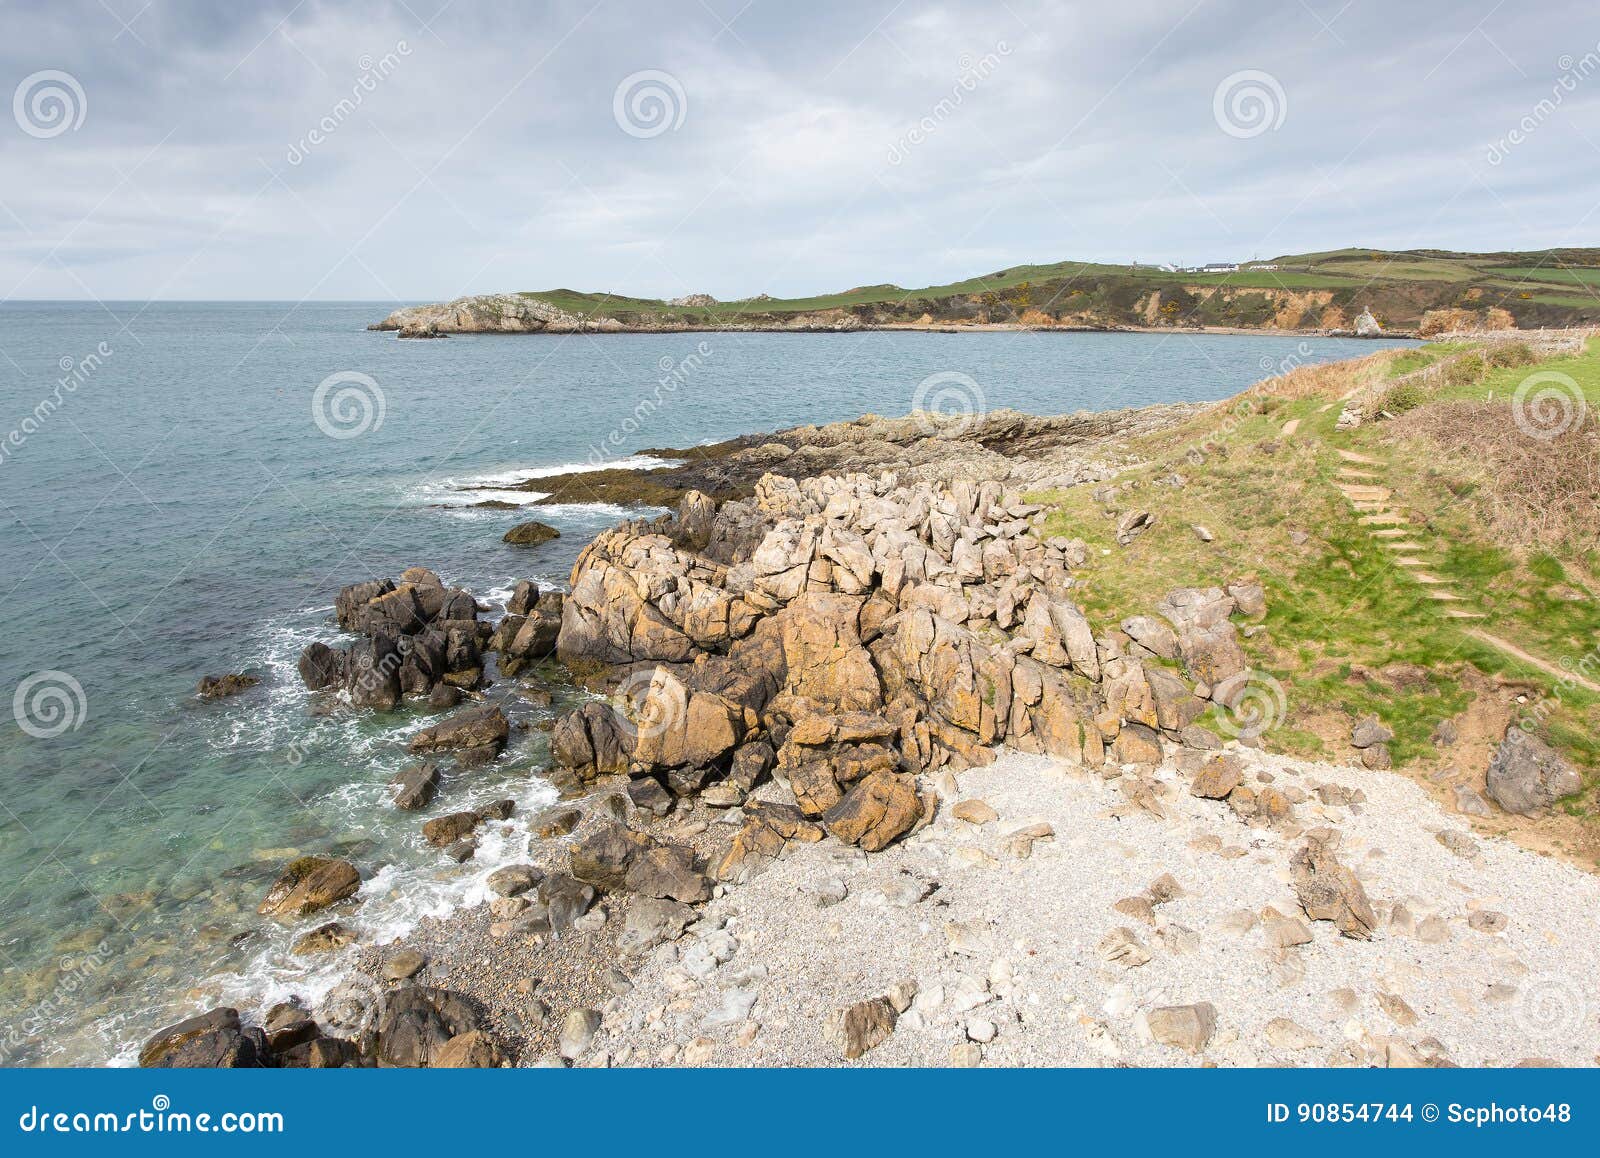 rocky bays close to cemaes bay in anglesey